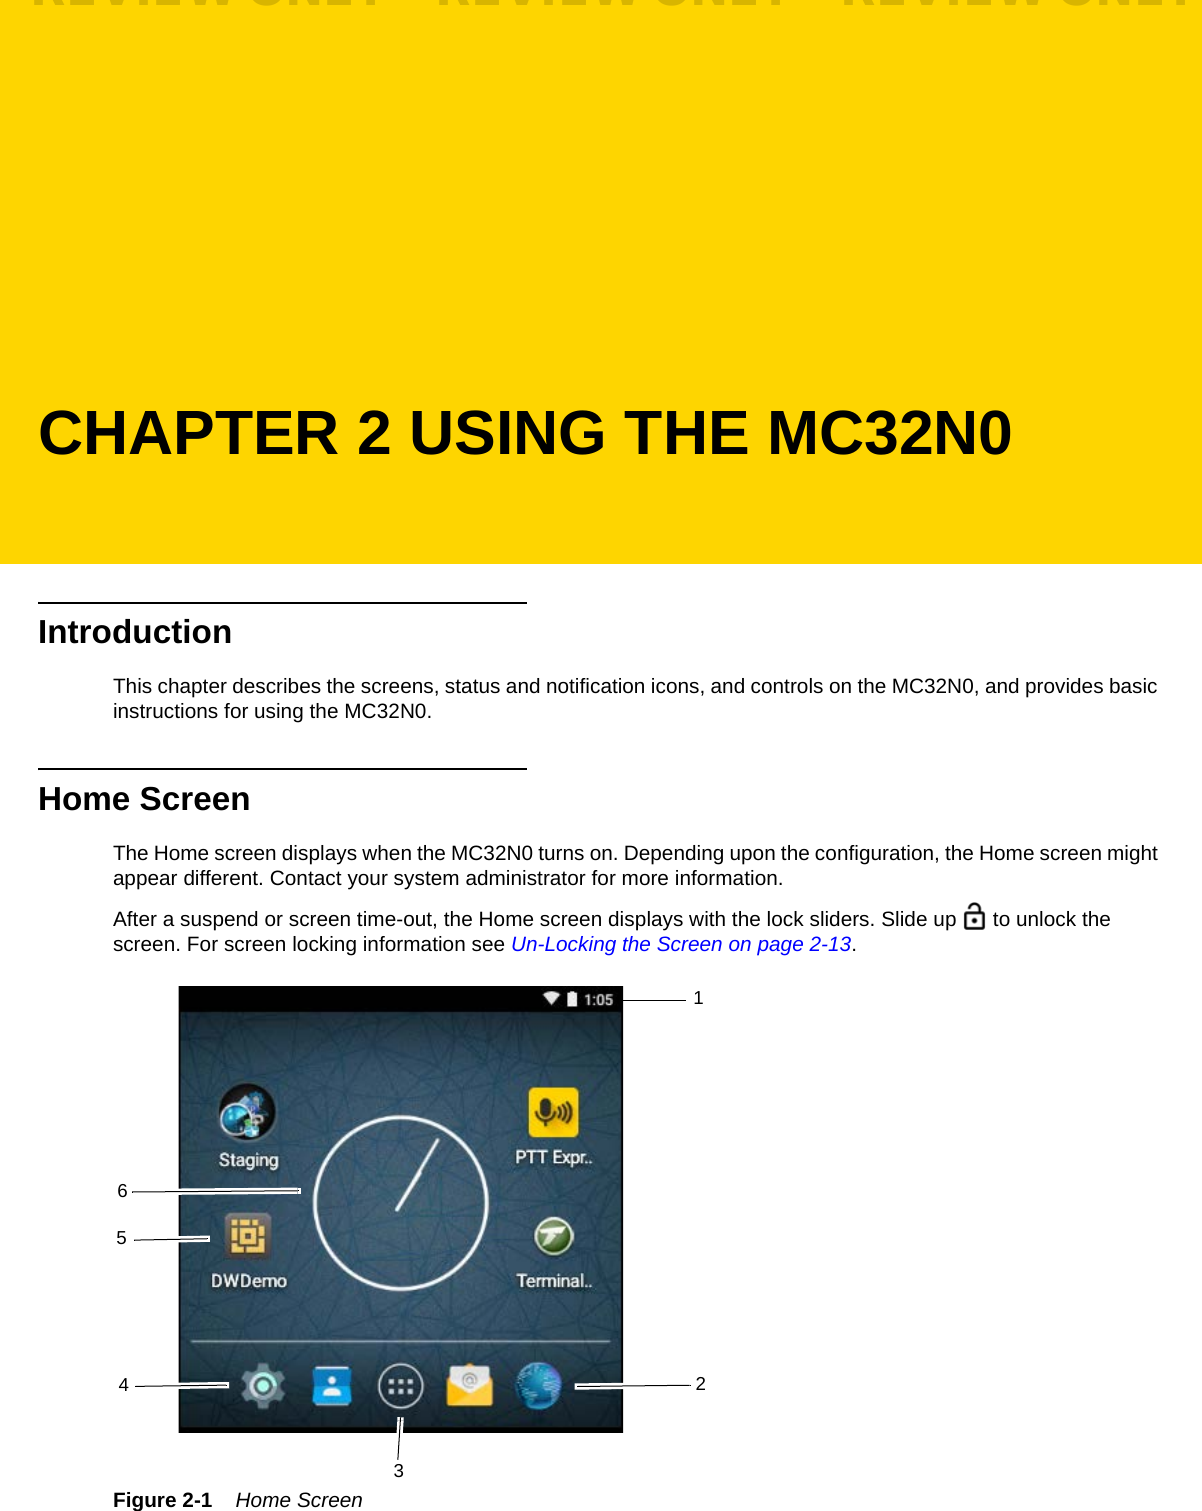 CHAPTER 2 USING THE MC32N0IntroductionThis chapter describes the screens, status and notification icons, and controls on the MC32N0, and provides basic instructions for using the MC32N0.Home ScreenThe Home screen displays when the MC32N0 turns on. Depending upon the configuration, the Home screen might appear different. Contact your system administrator for more information.After a suspend or screen time-out, the Home screen displays with the lock sliders. Slide up   to unlock the screen. For screen locking information see Un-Locking the Screen on page 2-13.Figure 2-1    Home Screen123456REVIEW ONLY - REVIEW ONLY - REVIEW ONLY                             REVIEW ONLY - REVIEW ONLY - REVIEW ONLY